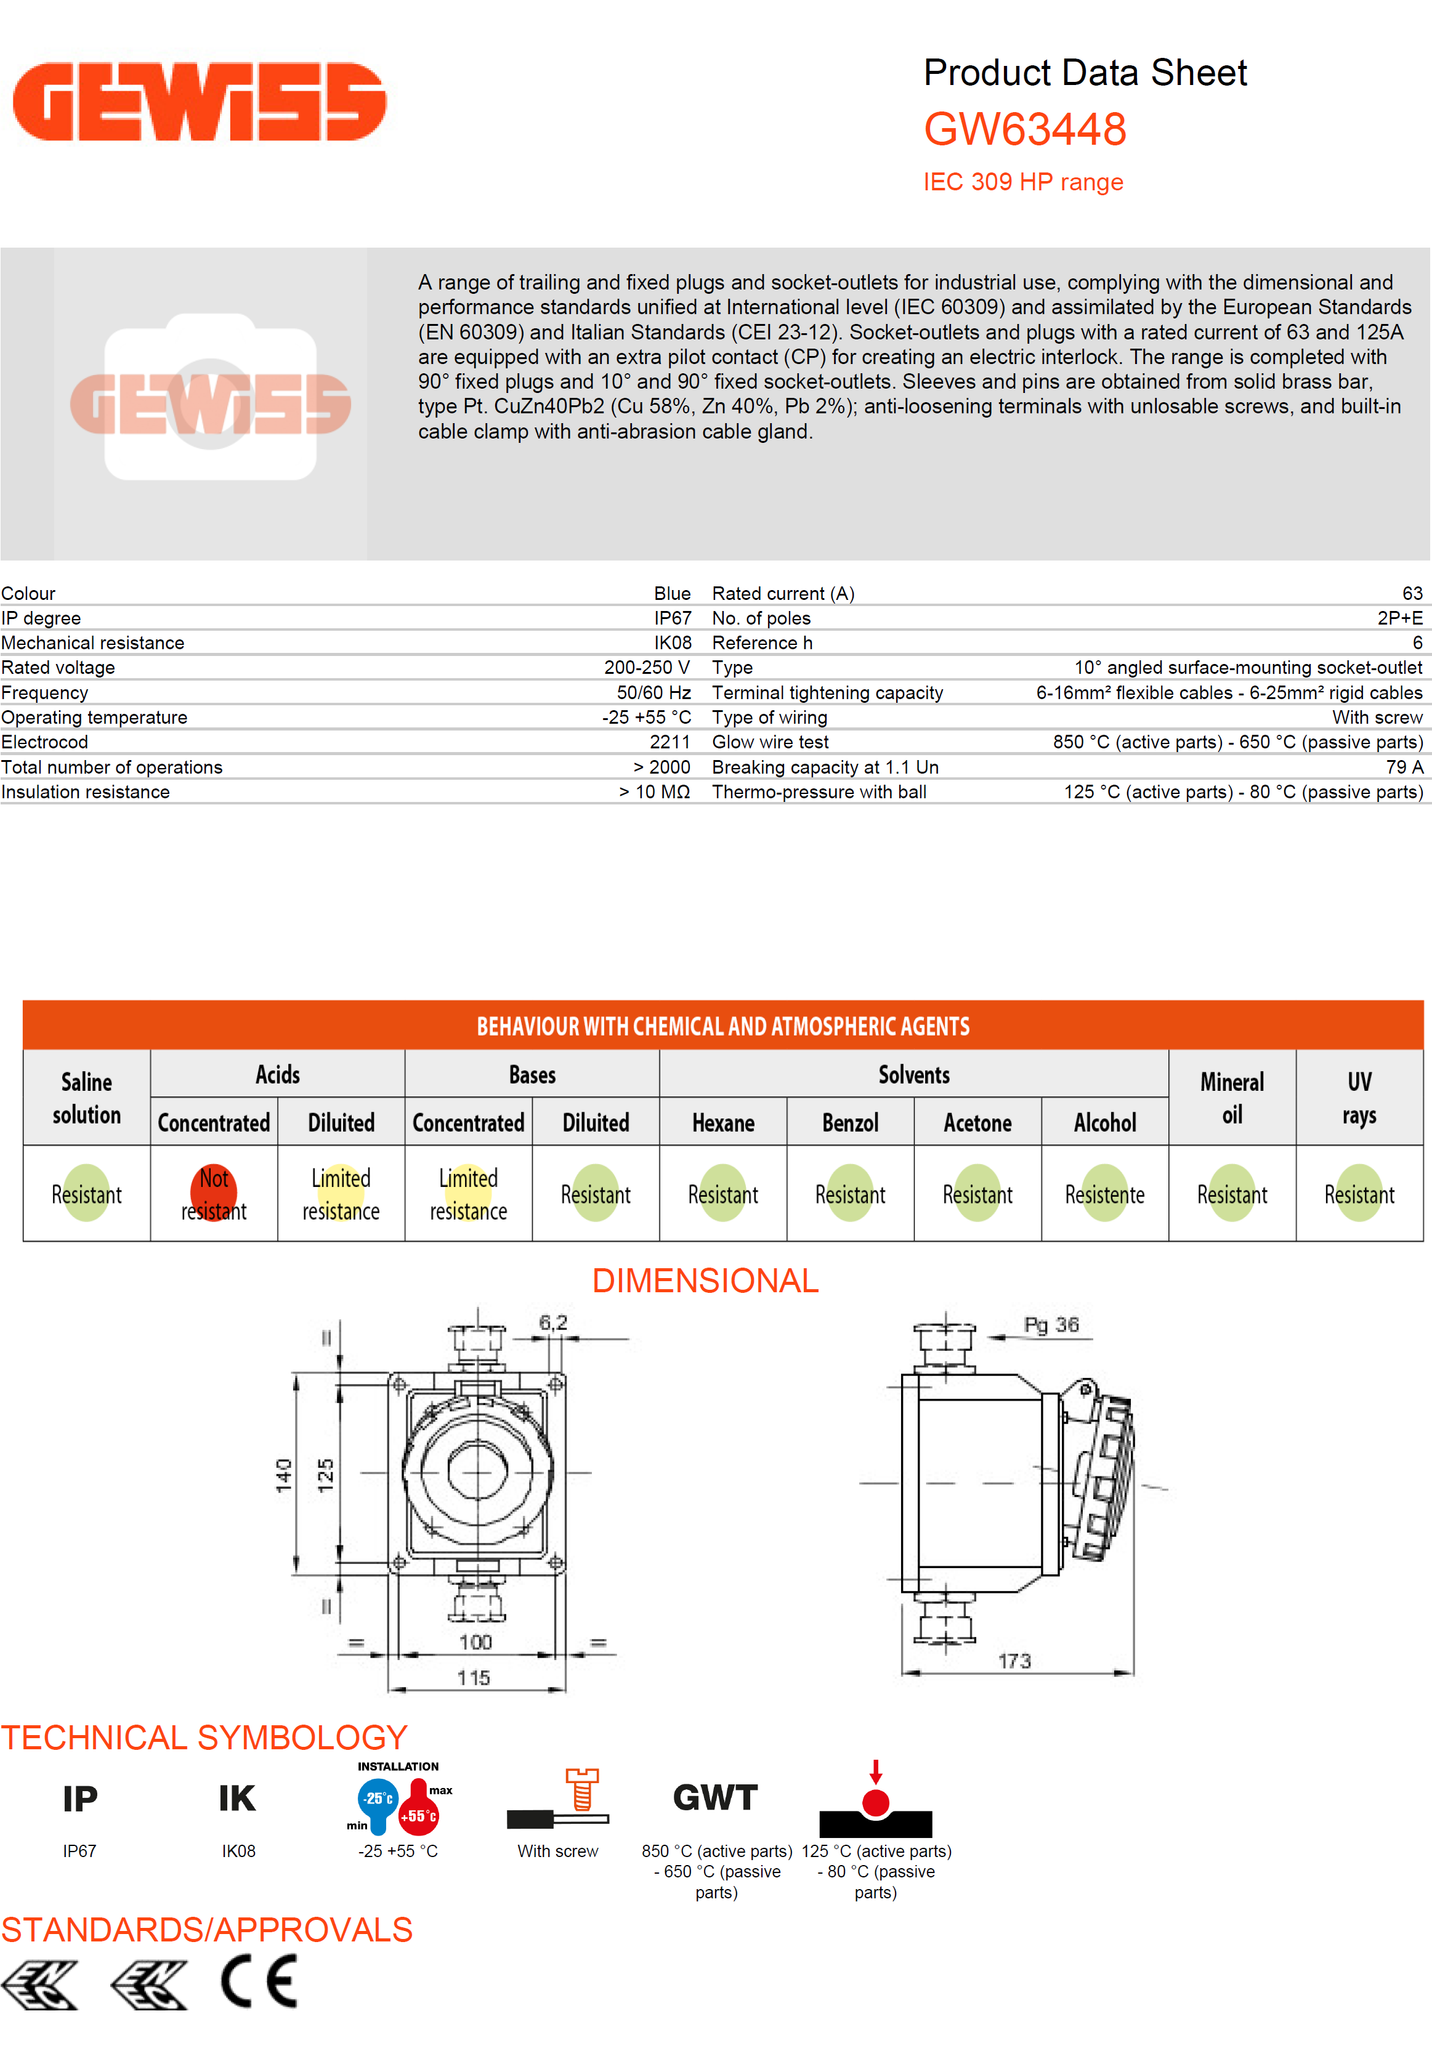 Gewiss 10° Angled Surface-Mounting Socket-Outlet-IP67-2P+E 63A 200-250V 50/60HZ Model# GW 63 448